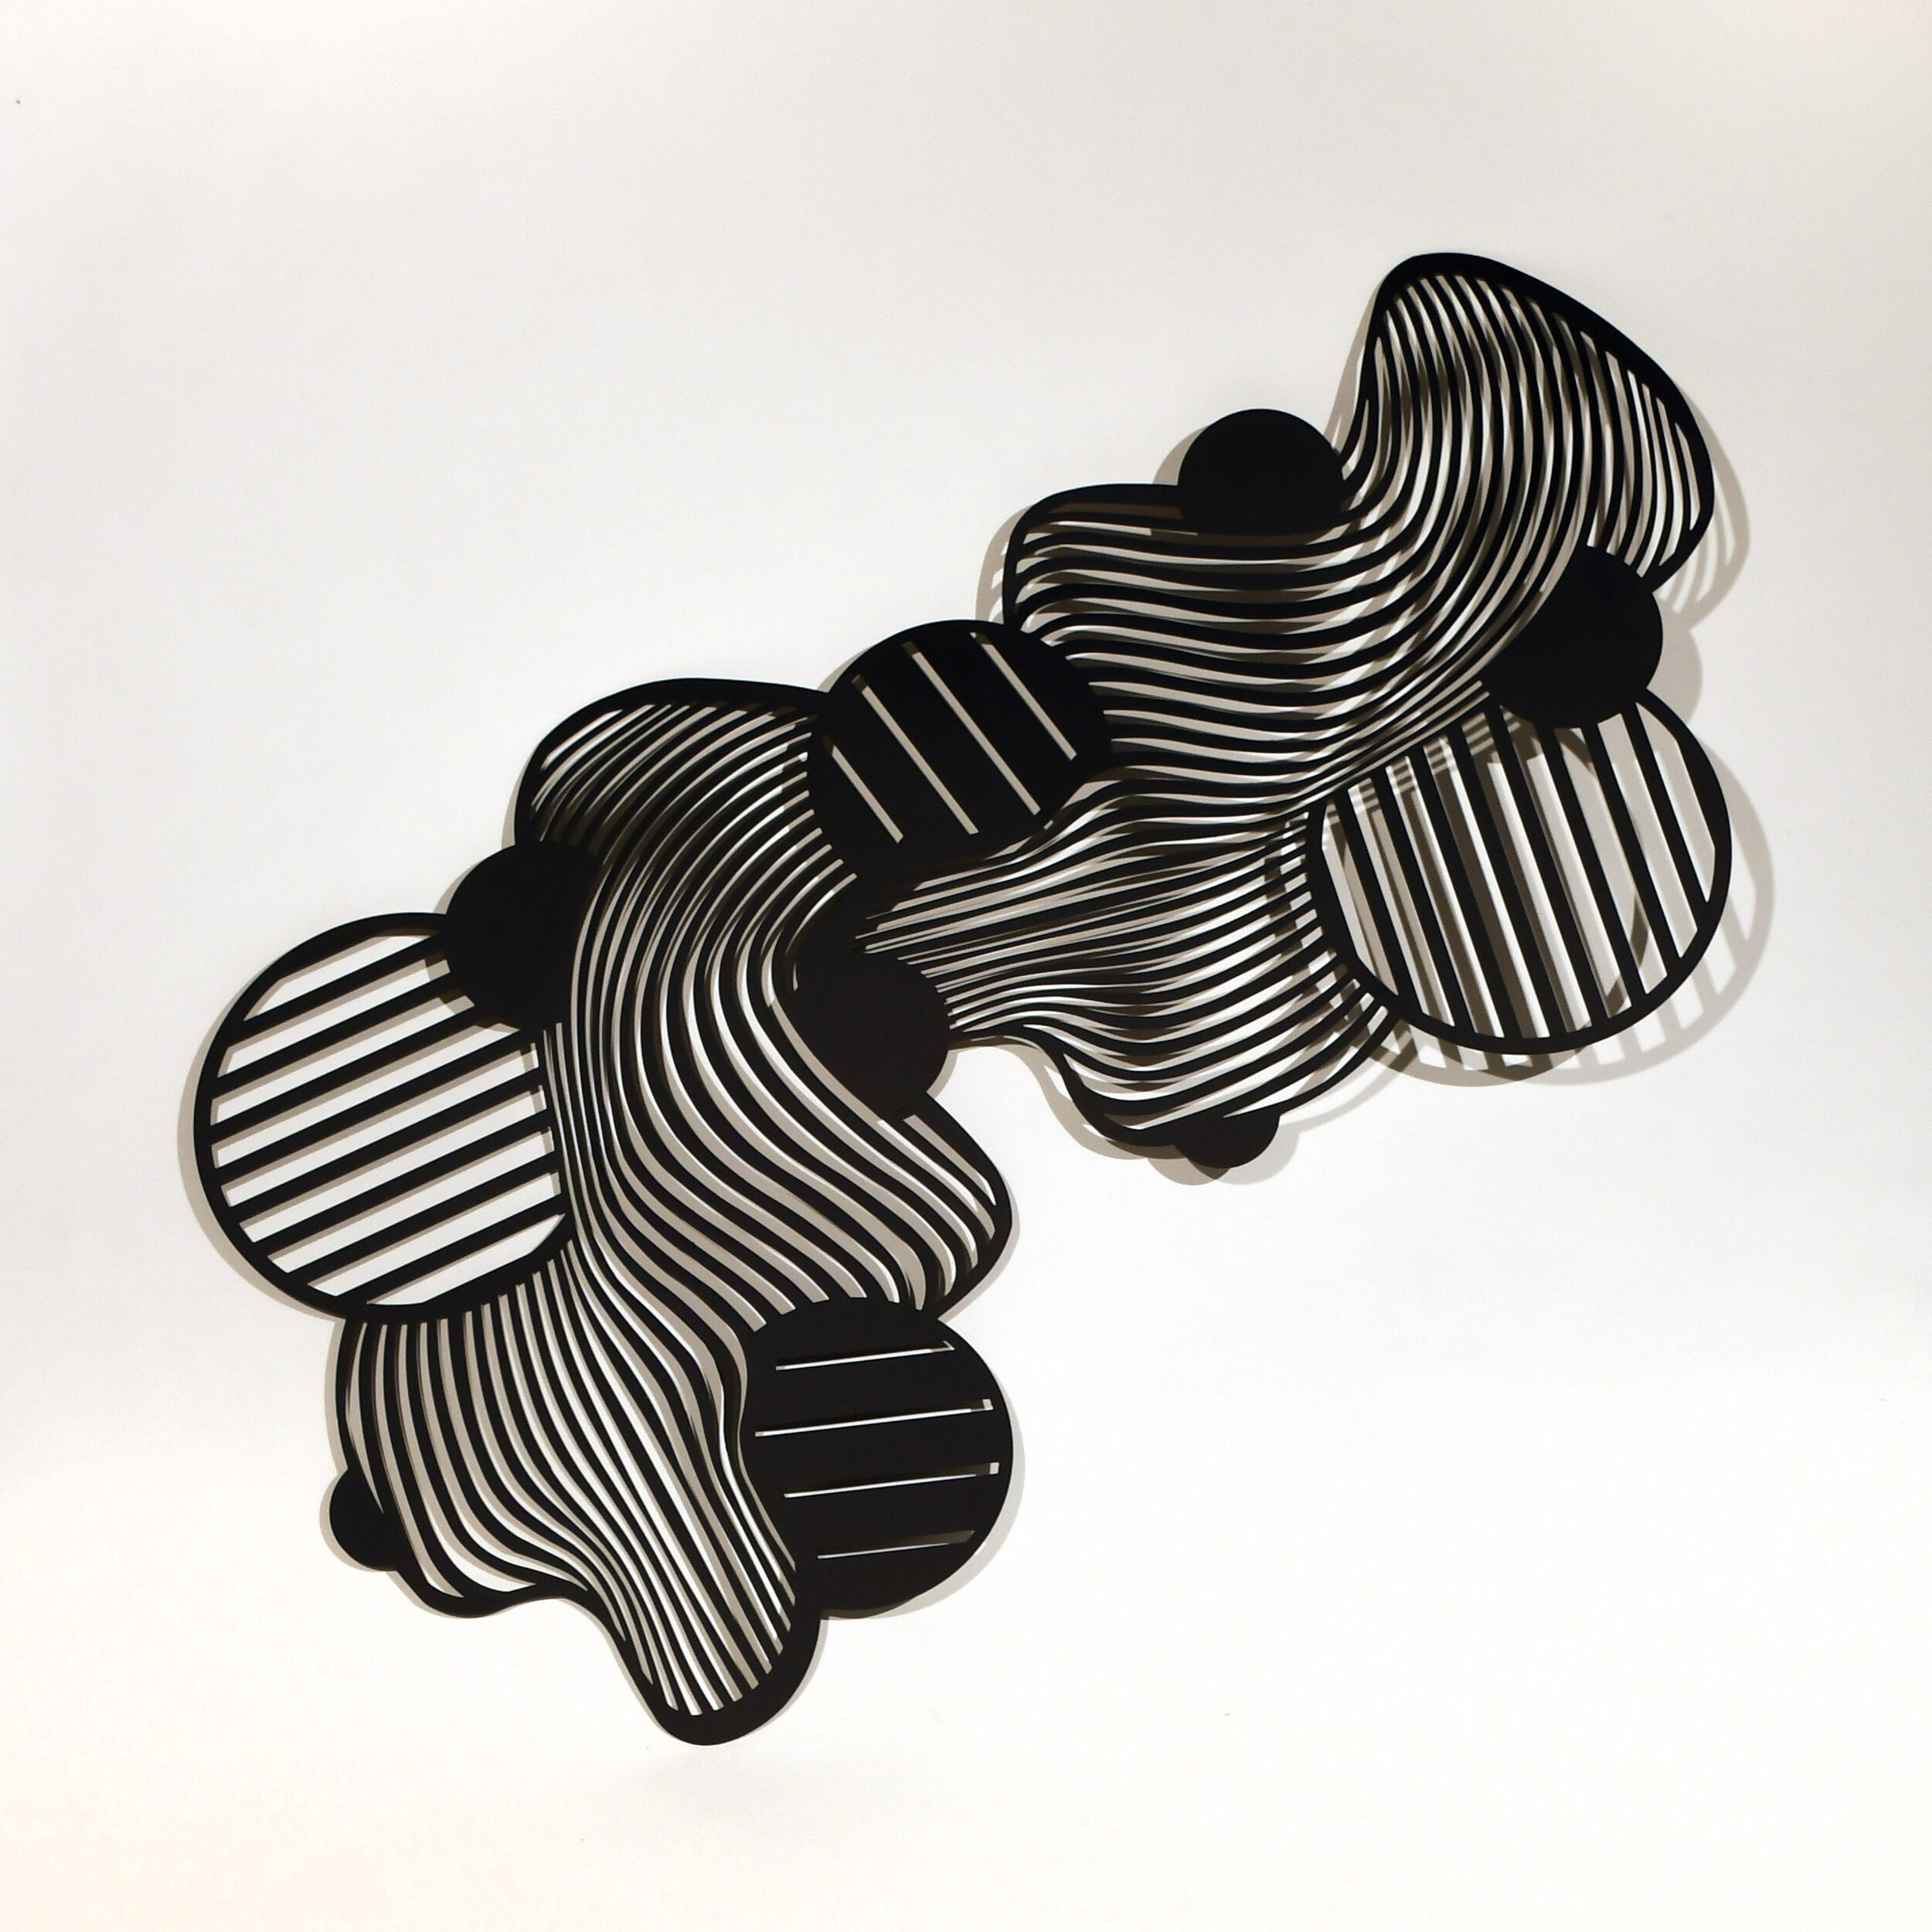  Wendy Letven,  Double Ripple , 2019, Powder-coated Aluminum, 34 x 30 inches 